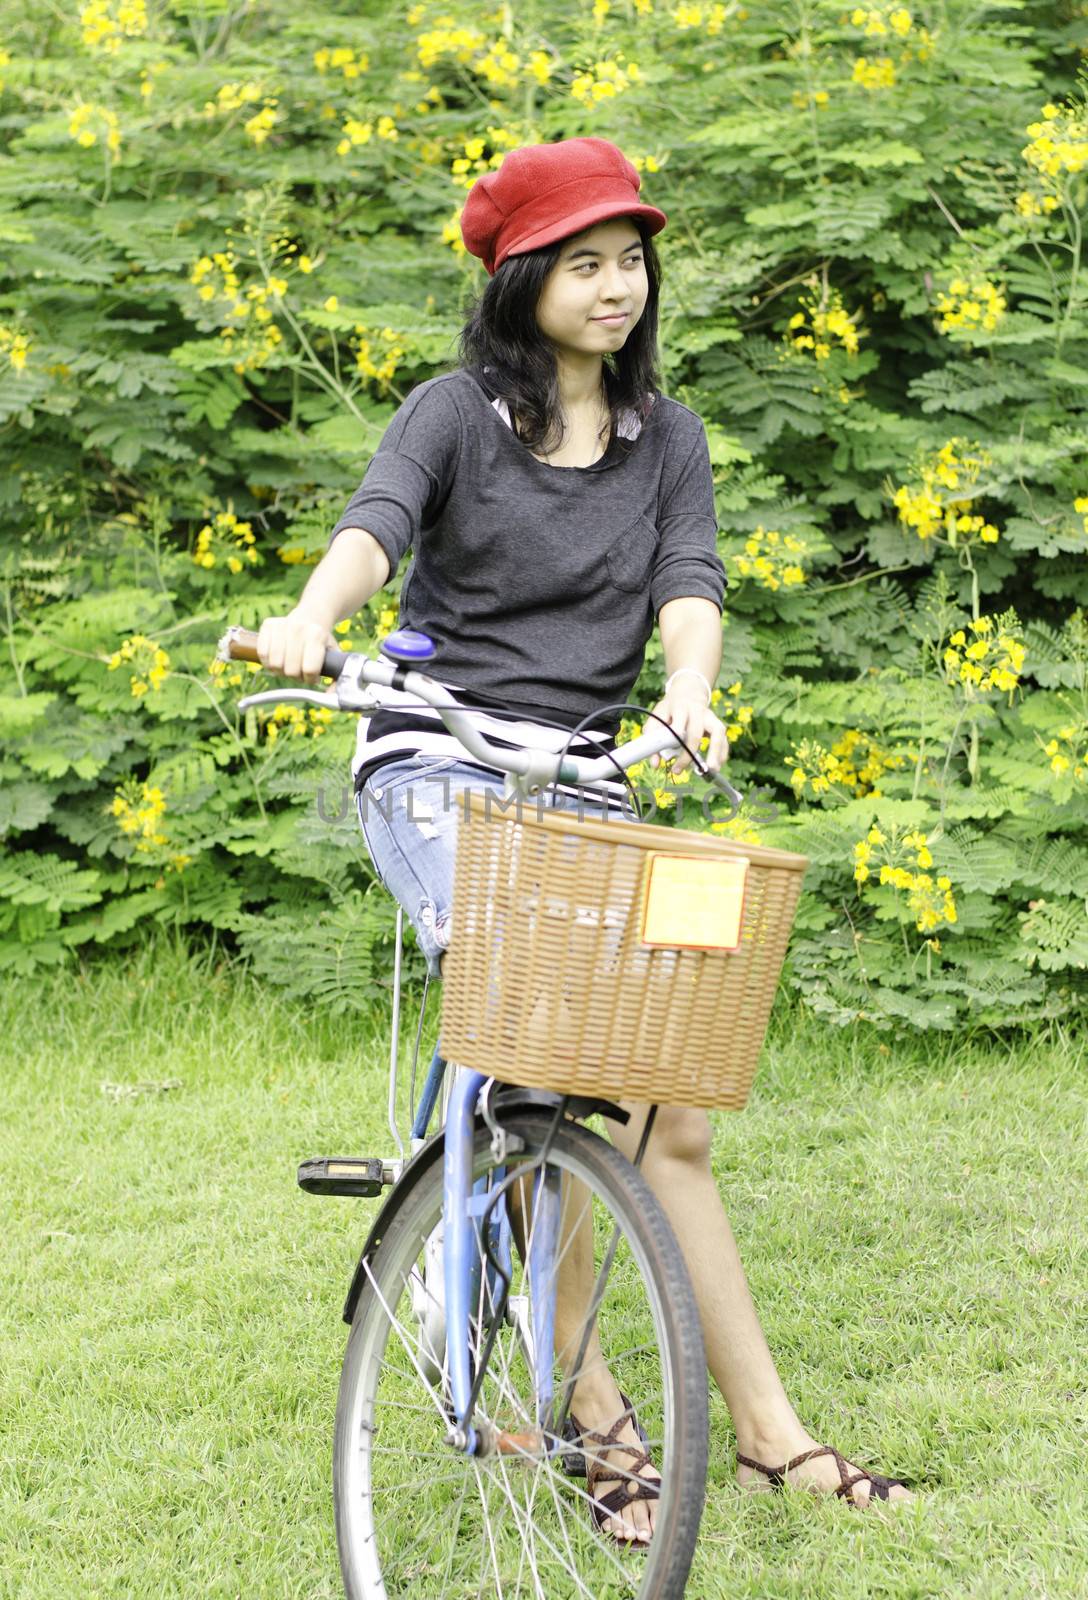 Young woman with retro bicycle in a park - outdoor portrait 